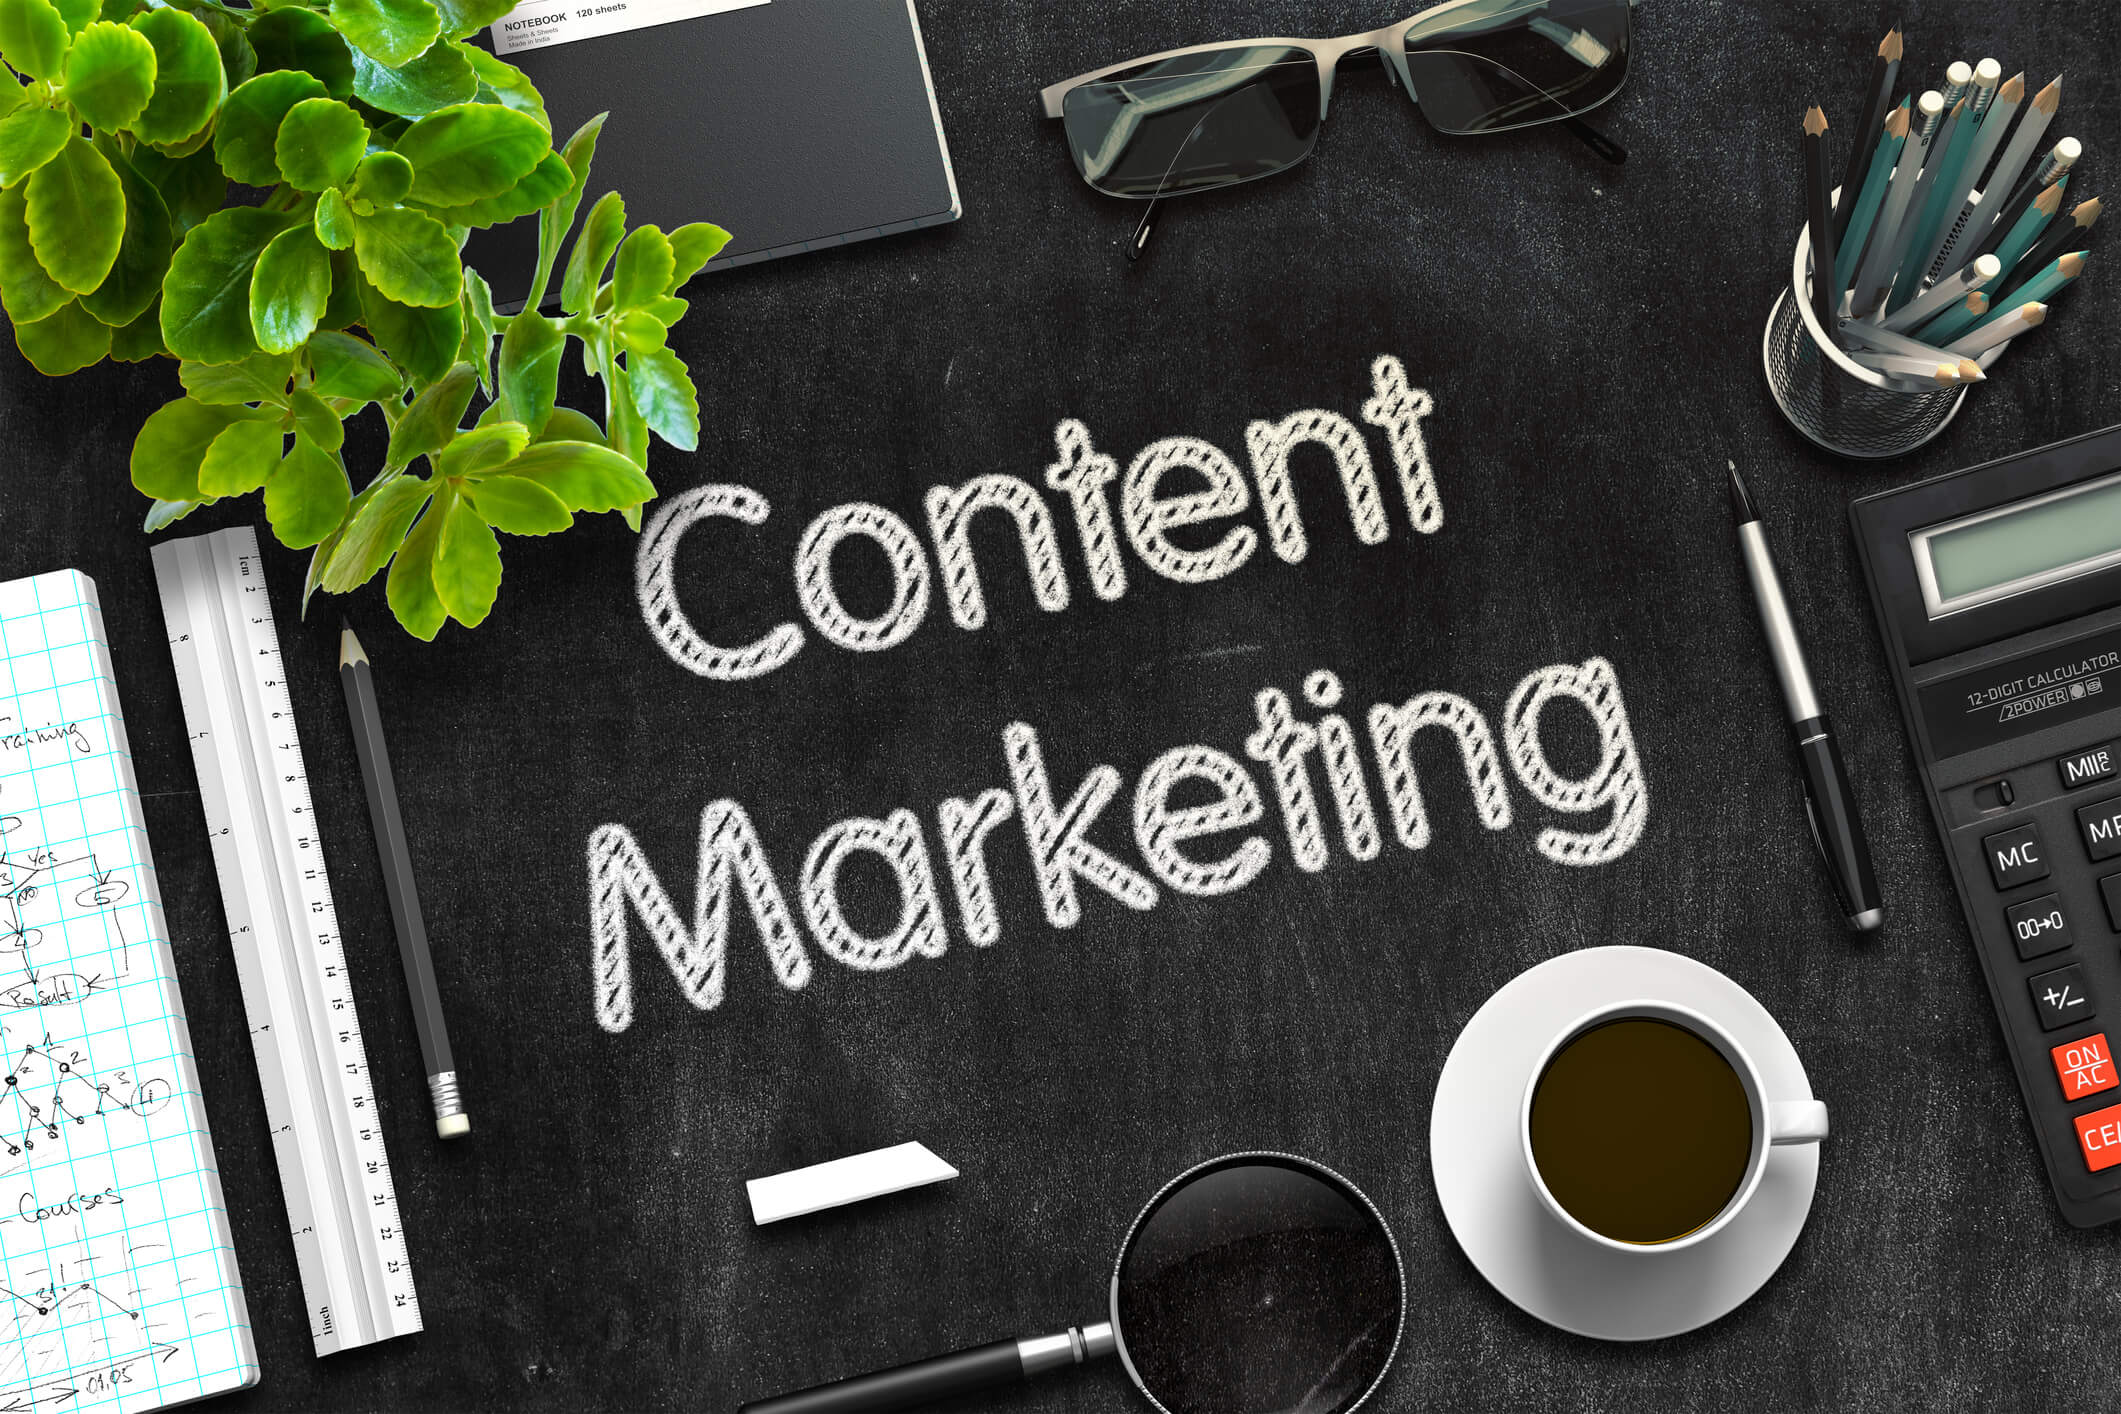 Pitfalls That Can Kill Your Content Marketing